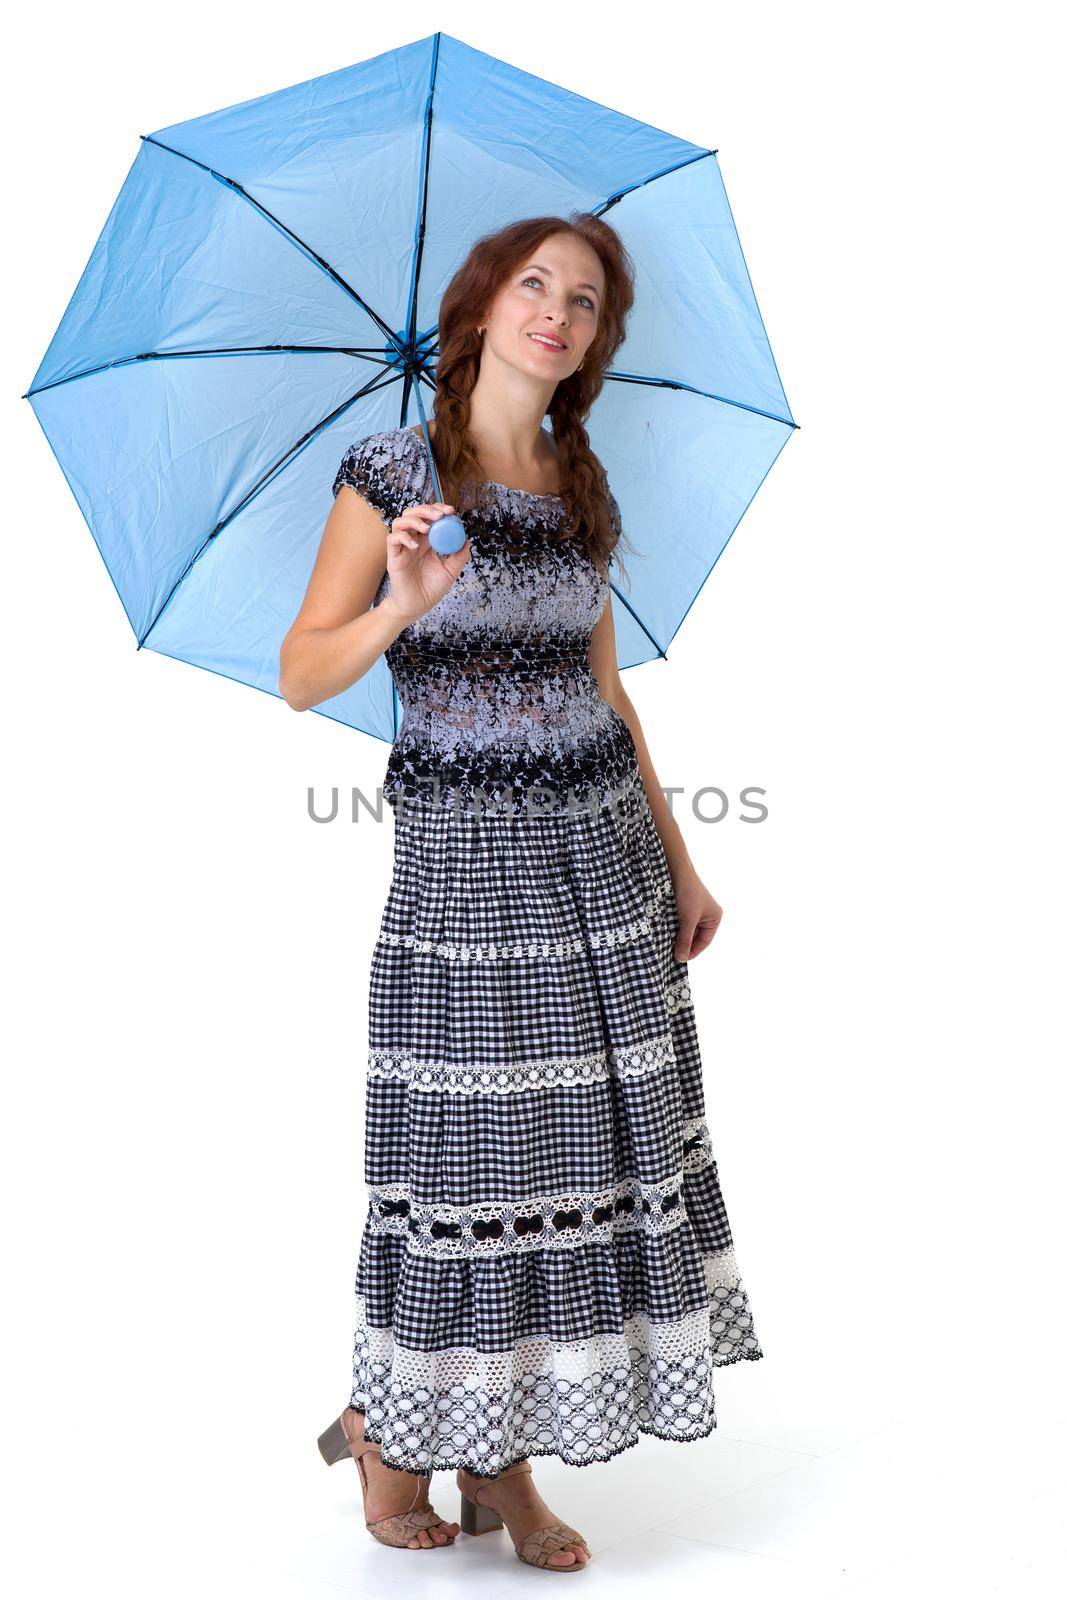 Beautiful woman walking under umbrella. Young woman wearing long elegant summer dress posing on isolated white background. Full length portrait of cheerful girl smiling at camera